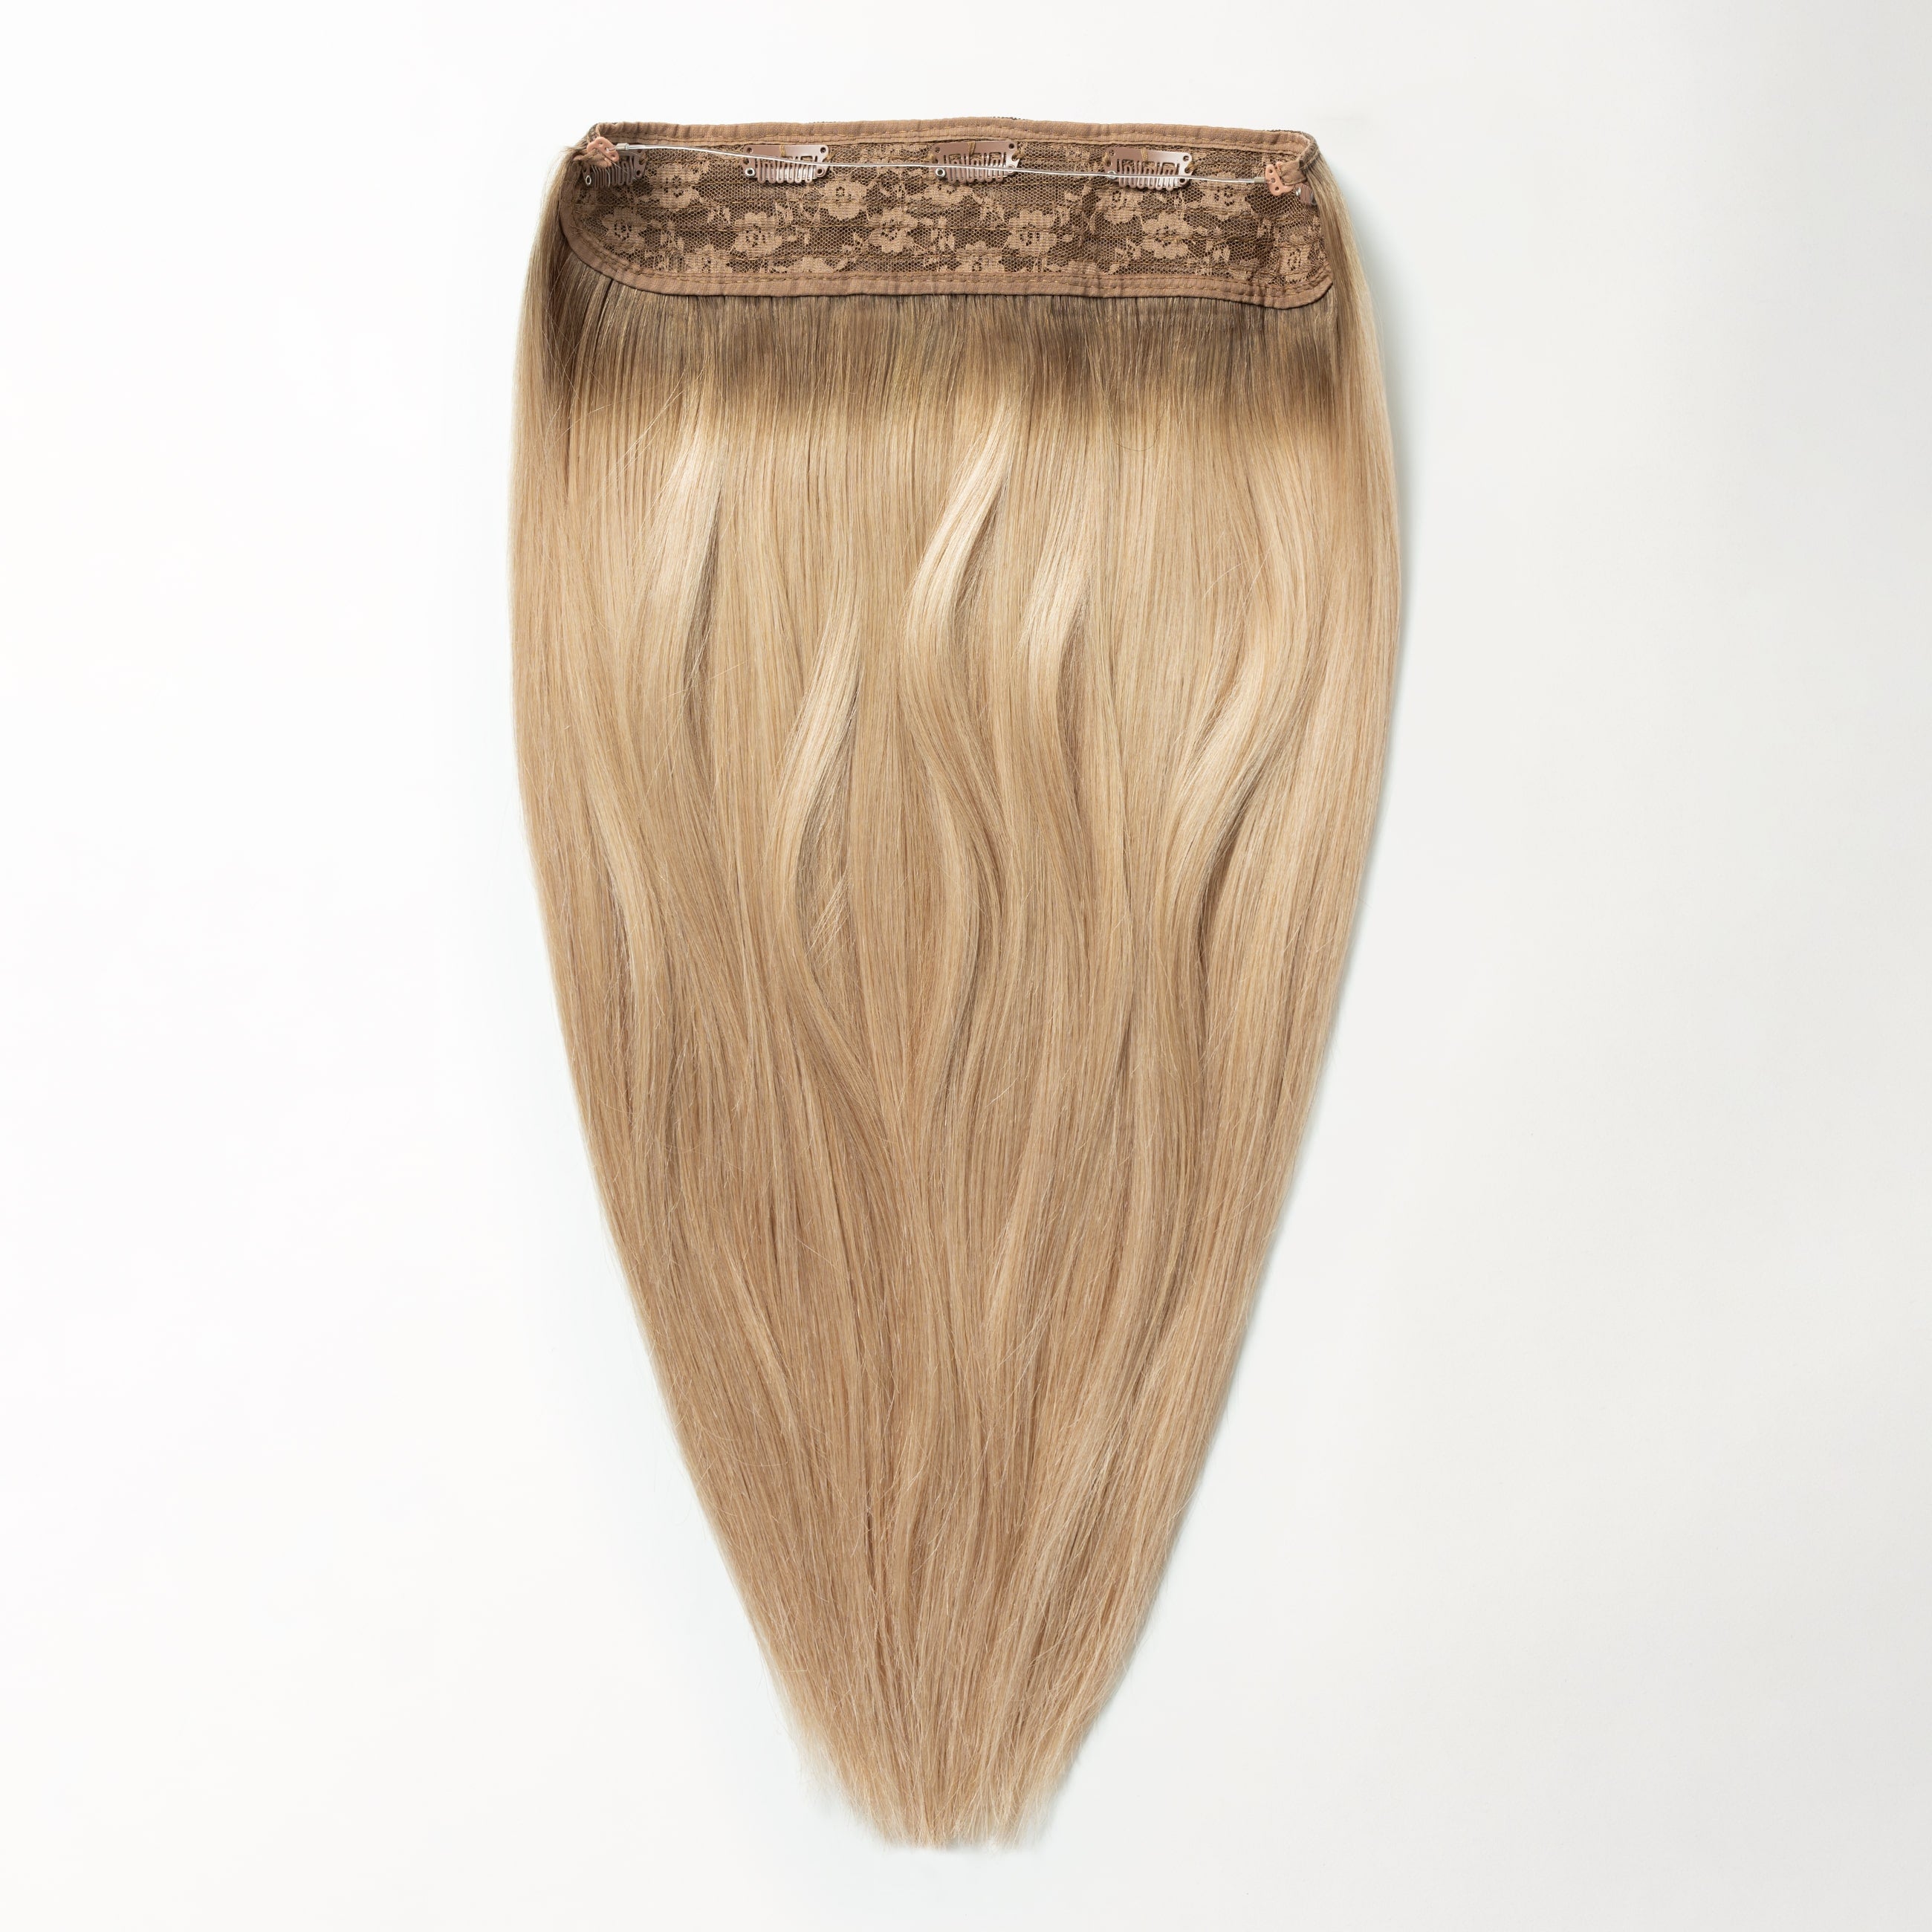 Halo extensions - Natural Blonde Root 5B+15